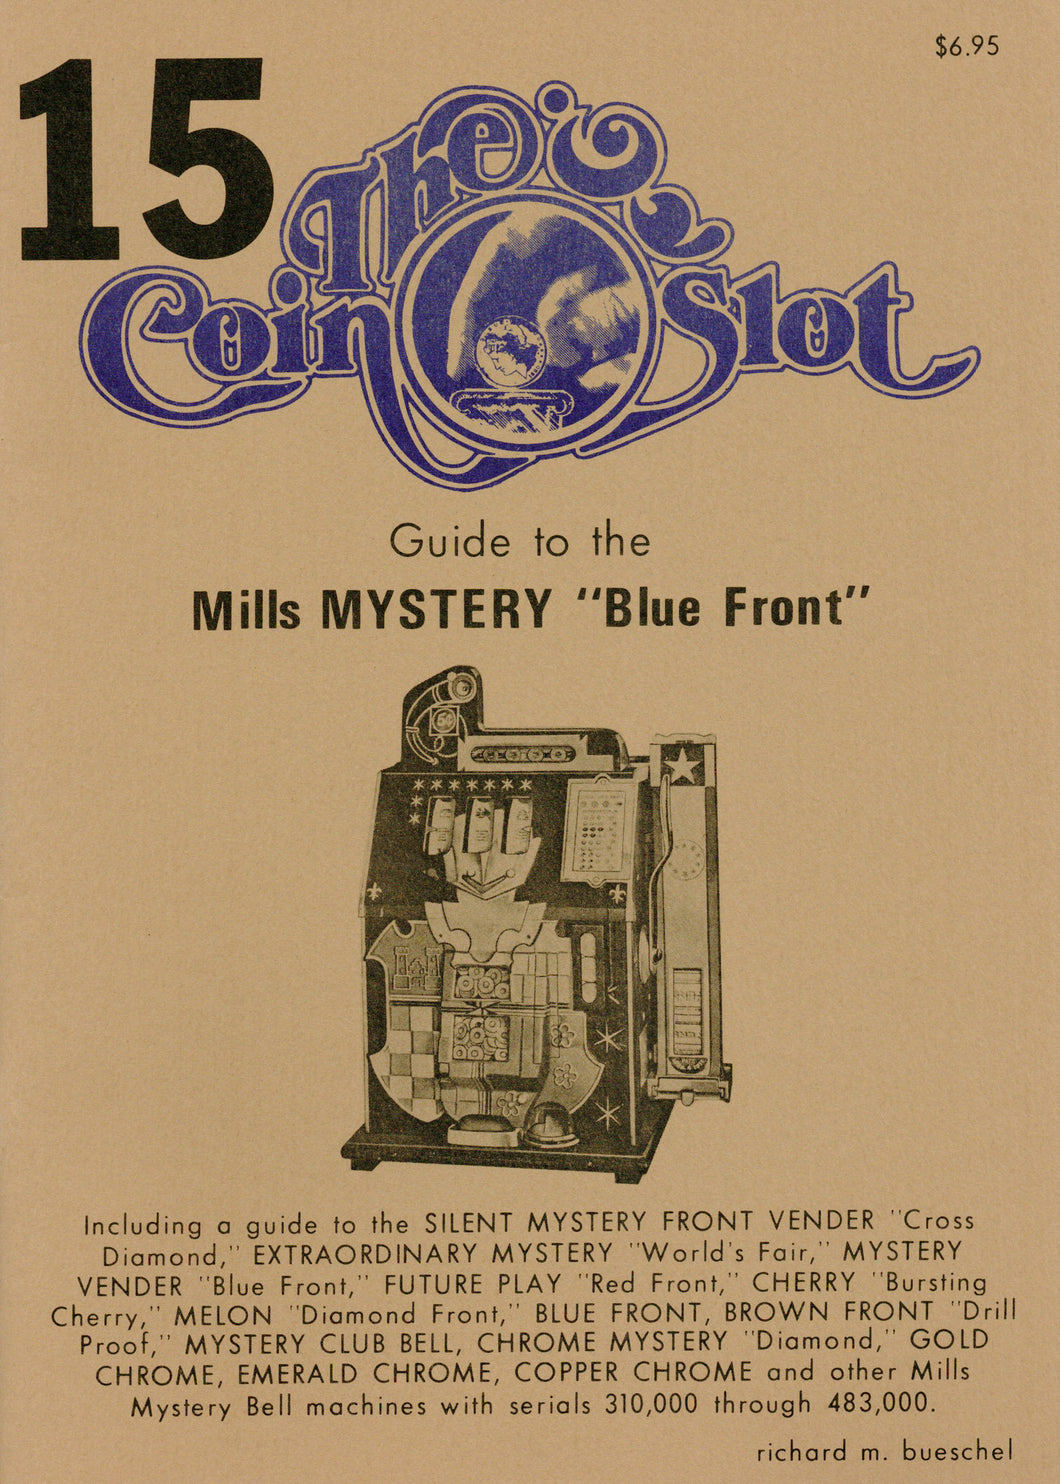 Coin Slot #15. Guide to the Mills Mystery 